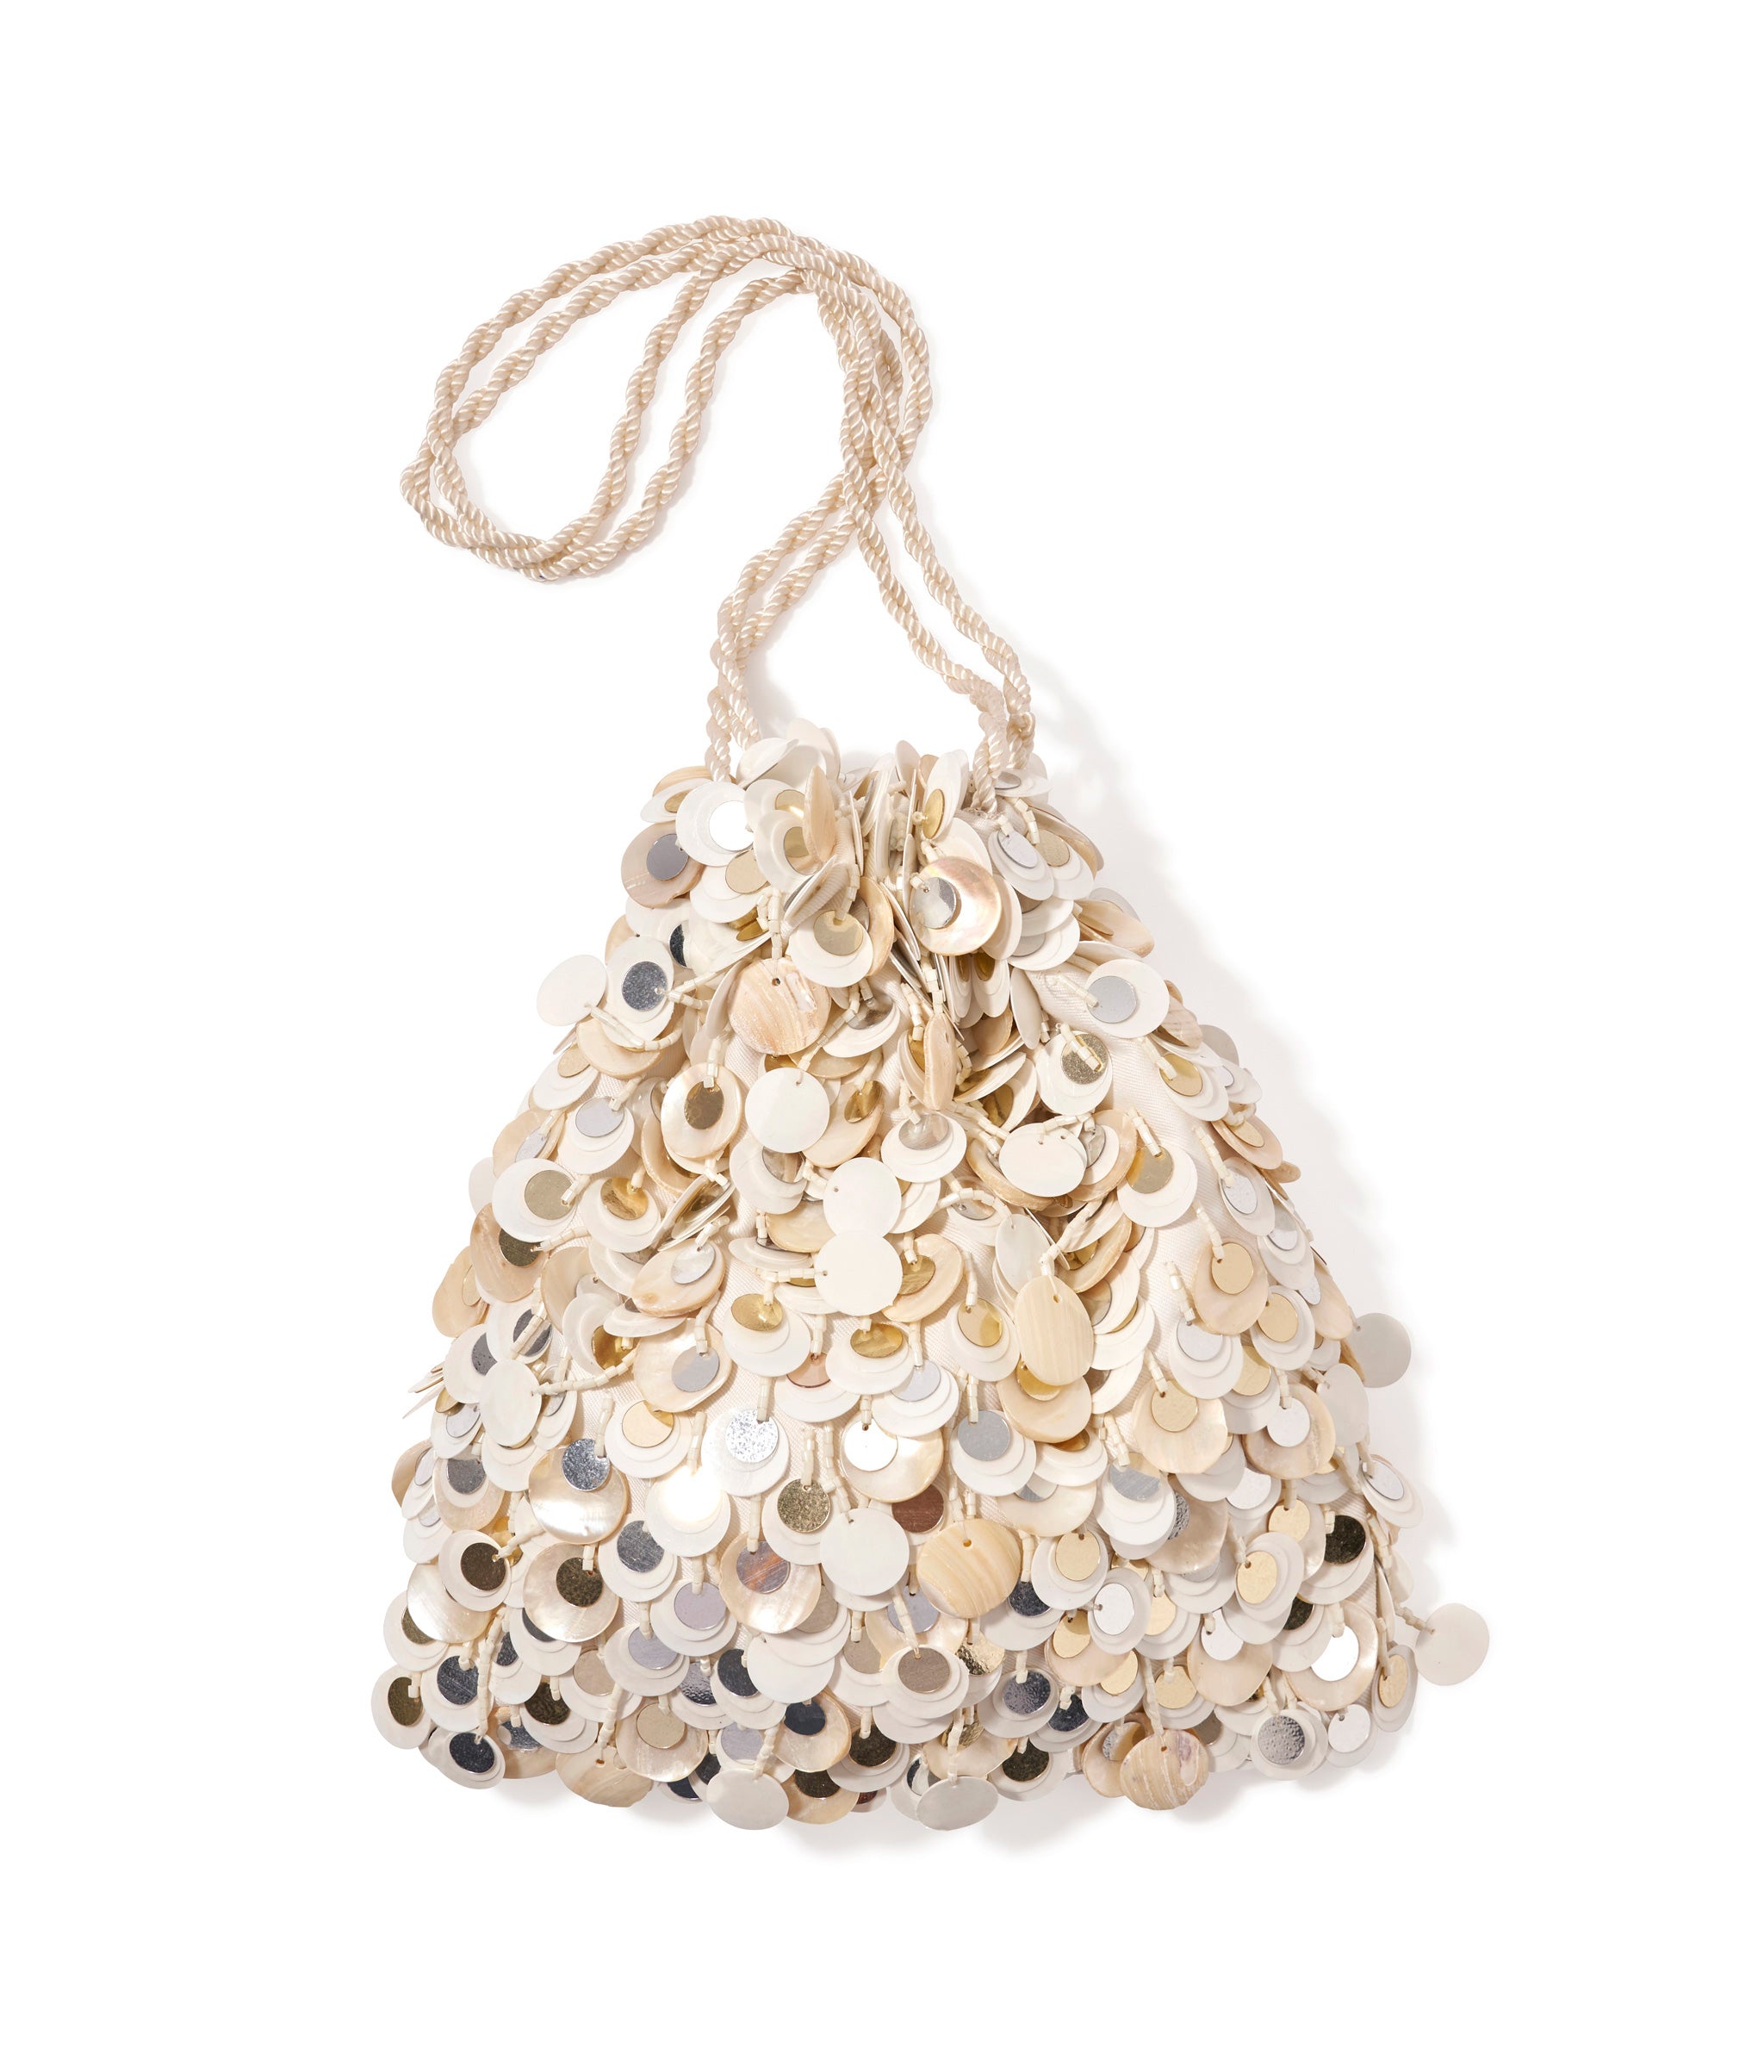 Gala Bag in Pearl Oyster. Hand-embellished evening bag with mother-of-pearl disks, silver sequins, silk cord wristlet.